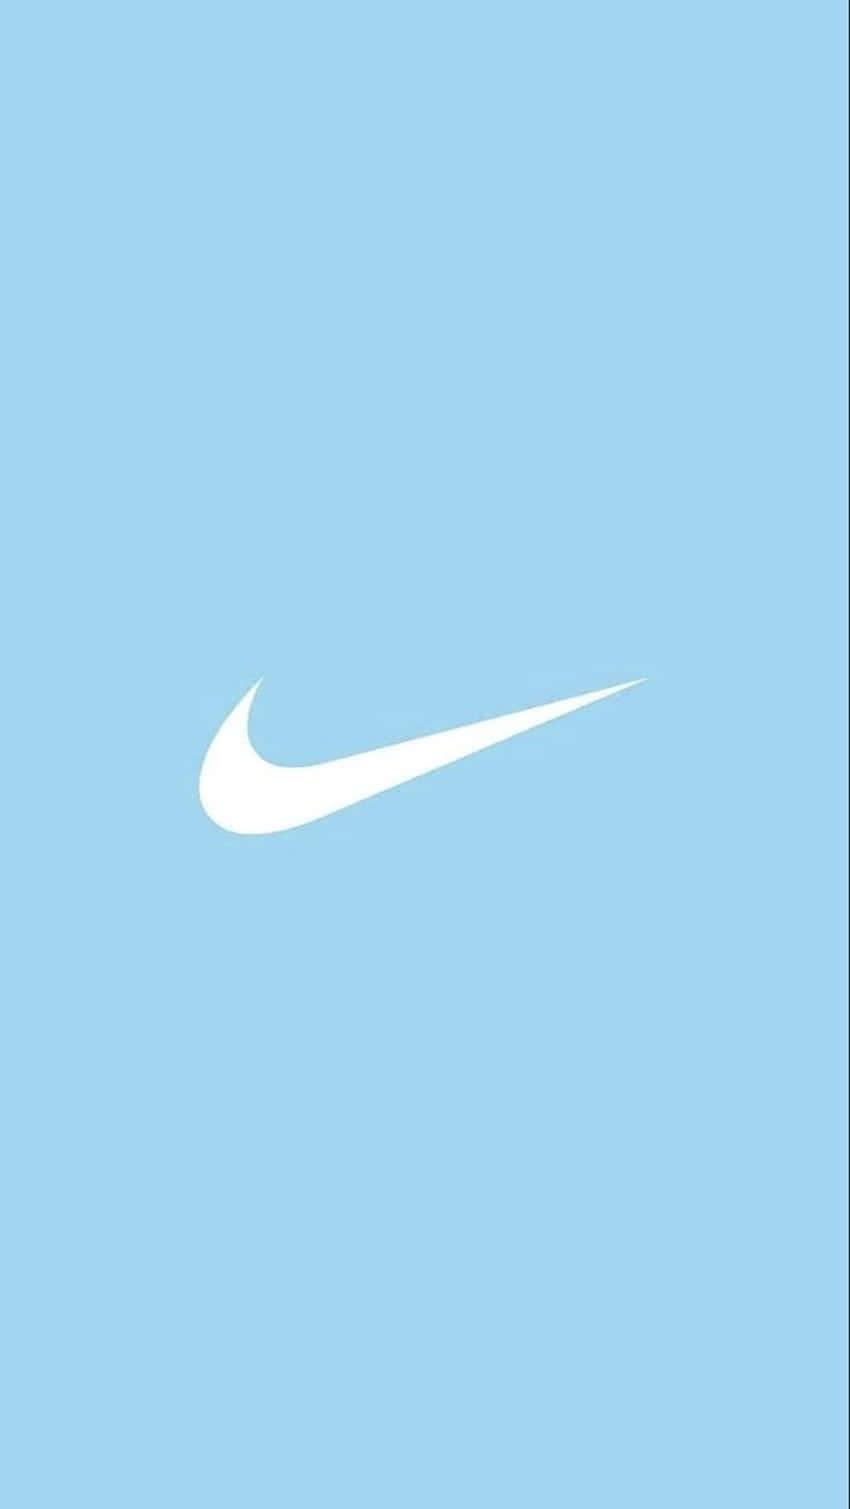 [100+] Blue Nike Wallpapers | Wallpapers.com